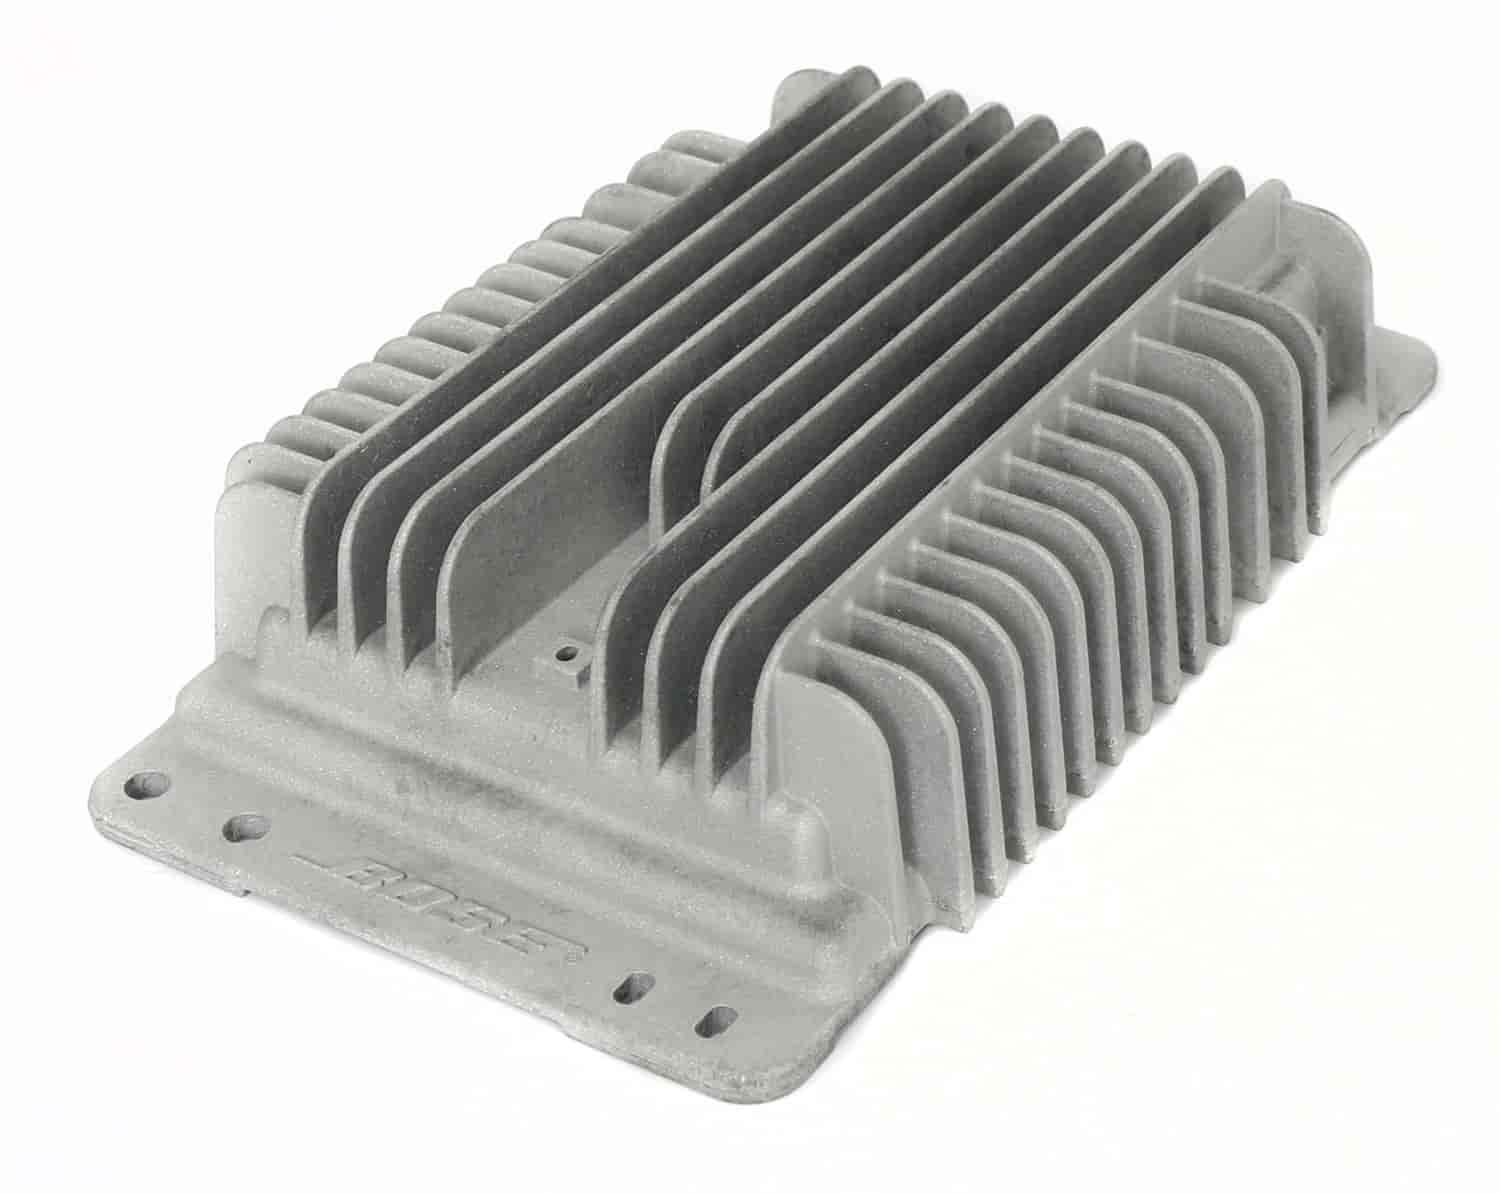 Factory Replacement Amplifier for 2003-2006 Chevy/GMC SUV